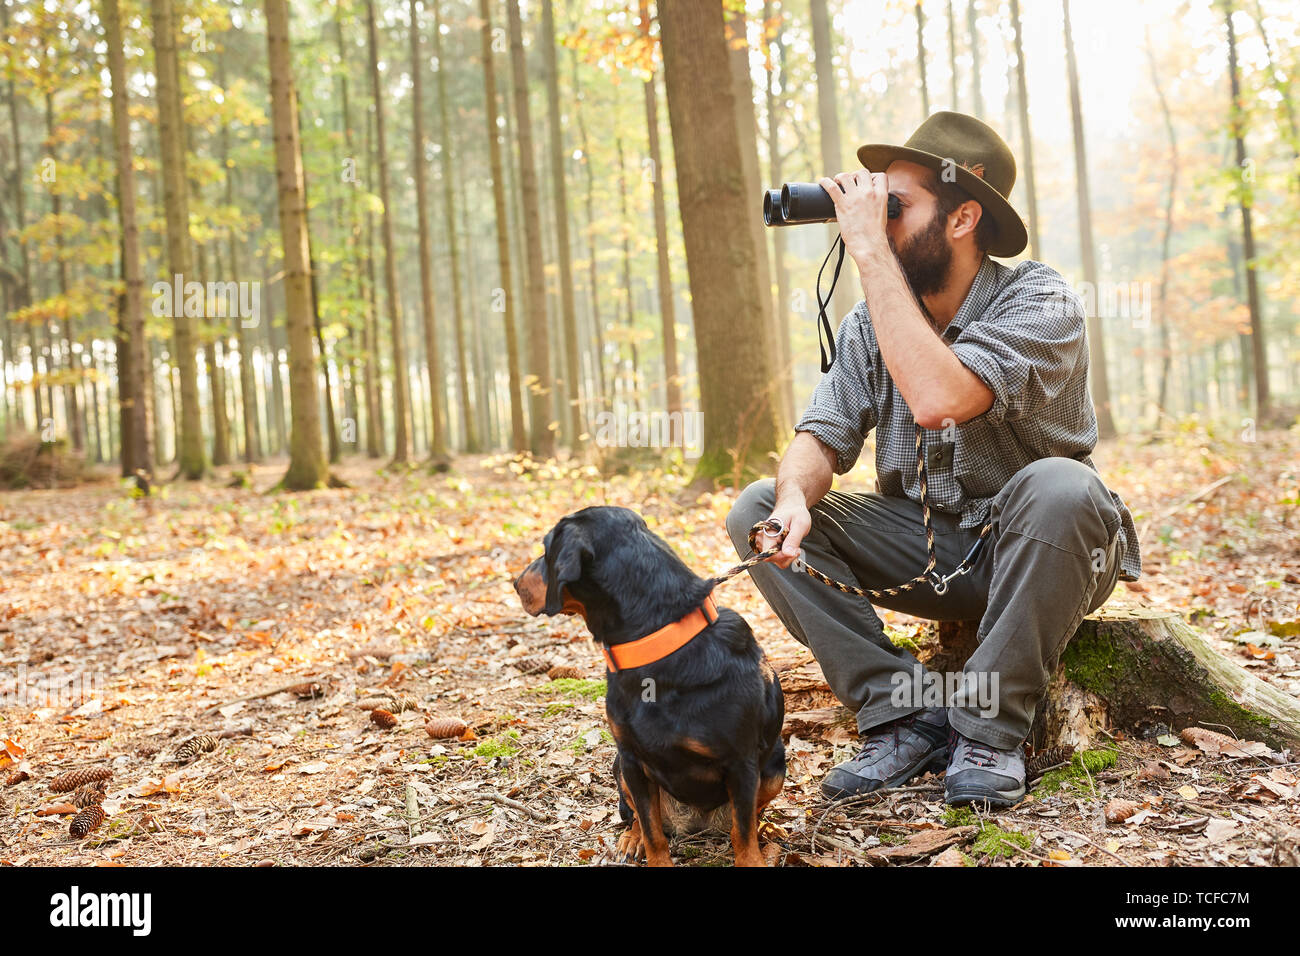 A hunter or forester with a hound as a hunting dog watches nature through binoculars Stock Photo